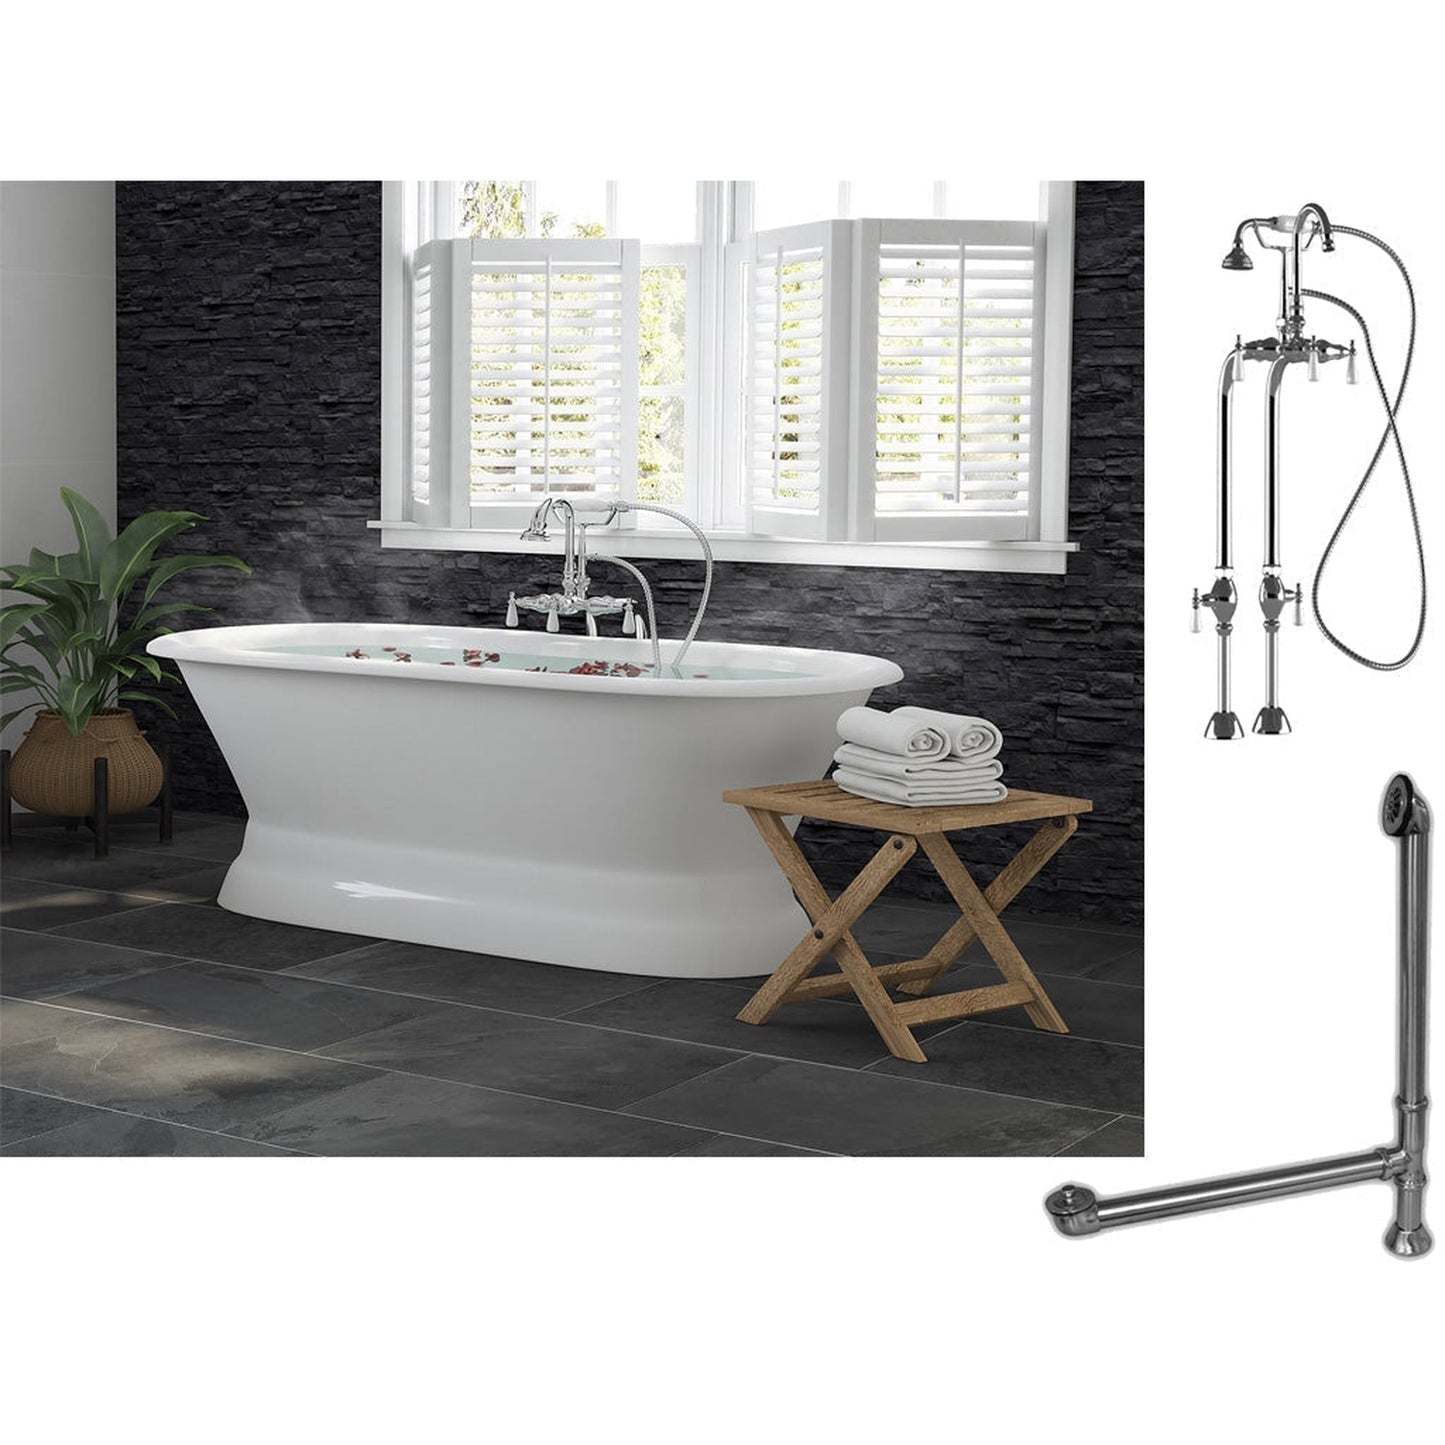 Cambridge Plumbing 66" White Cast Iron Double Ended Pedestal Bathtub With No Deck Holes And Complete Plumbing Package Including Freestanding English Telephone Gooseneck Faucet, Drain And Overflow Assembly In Polished Chrome